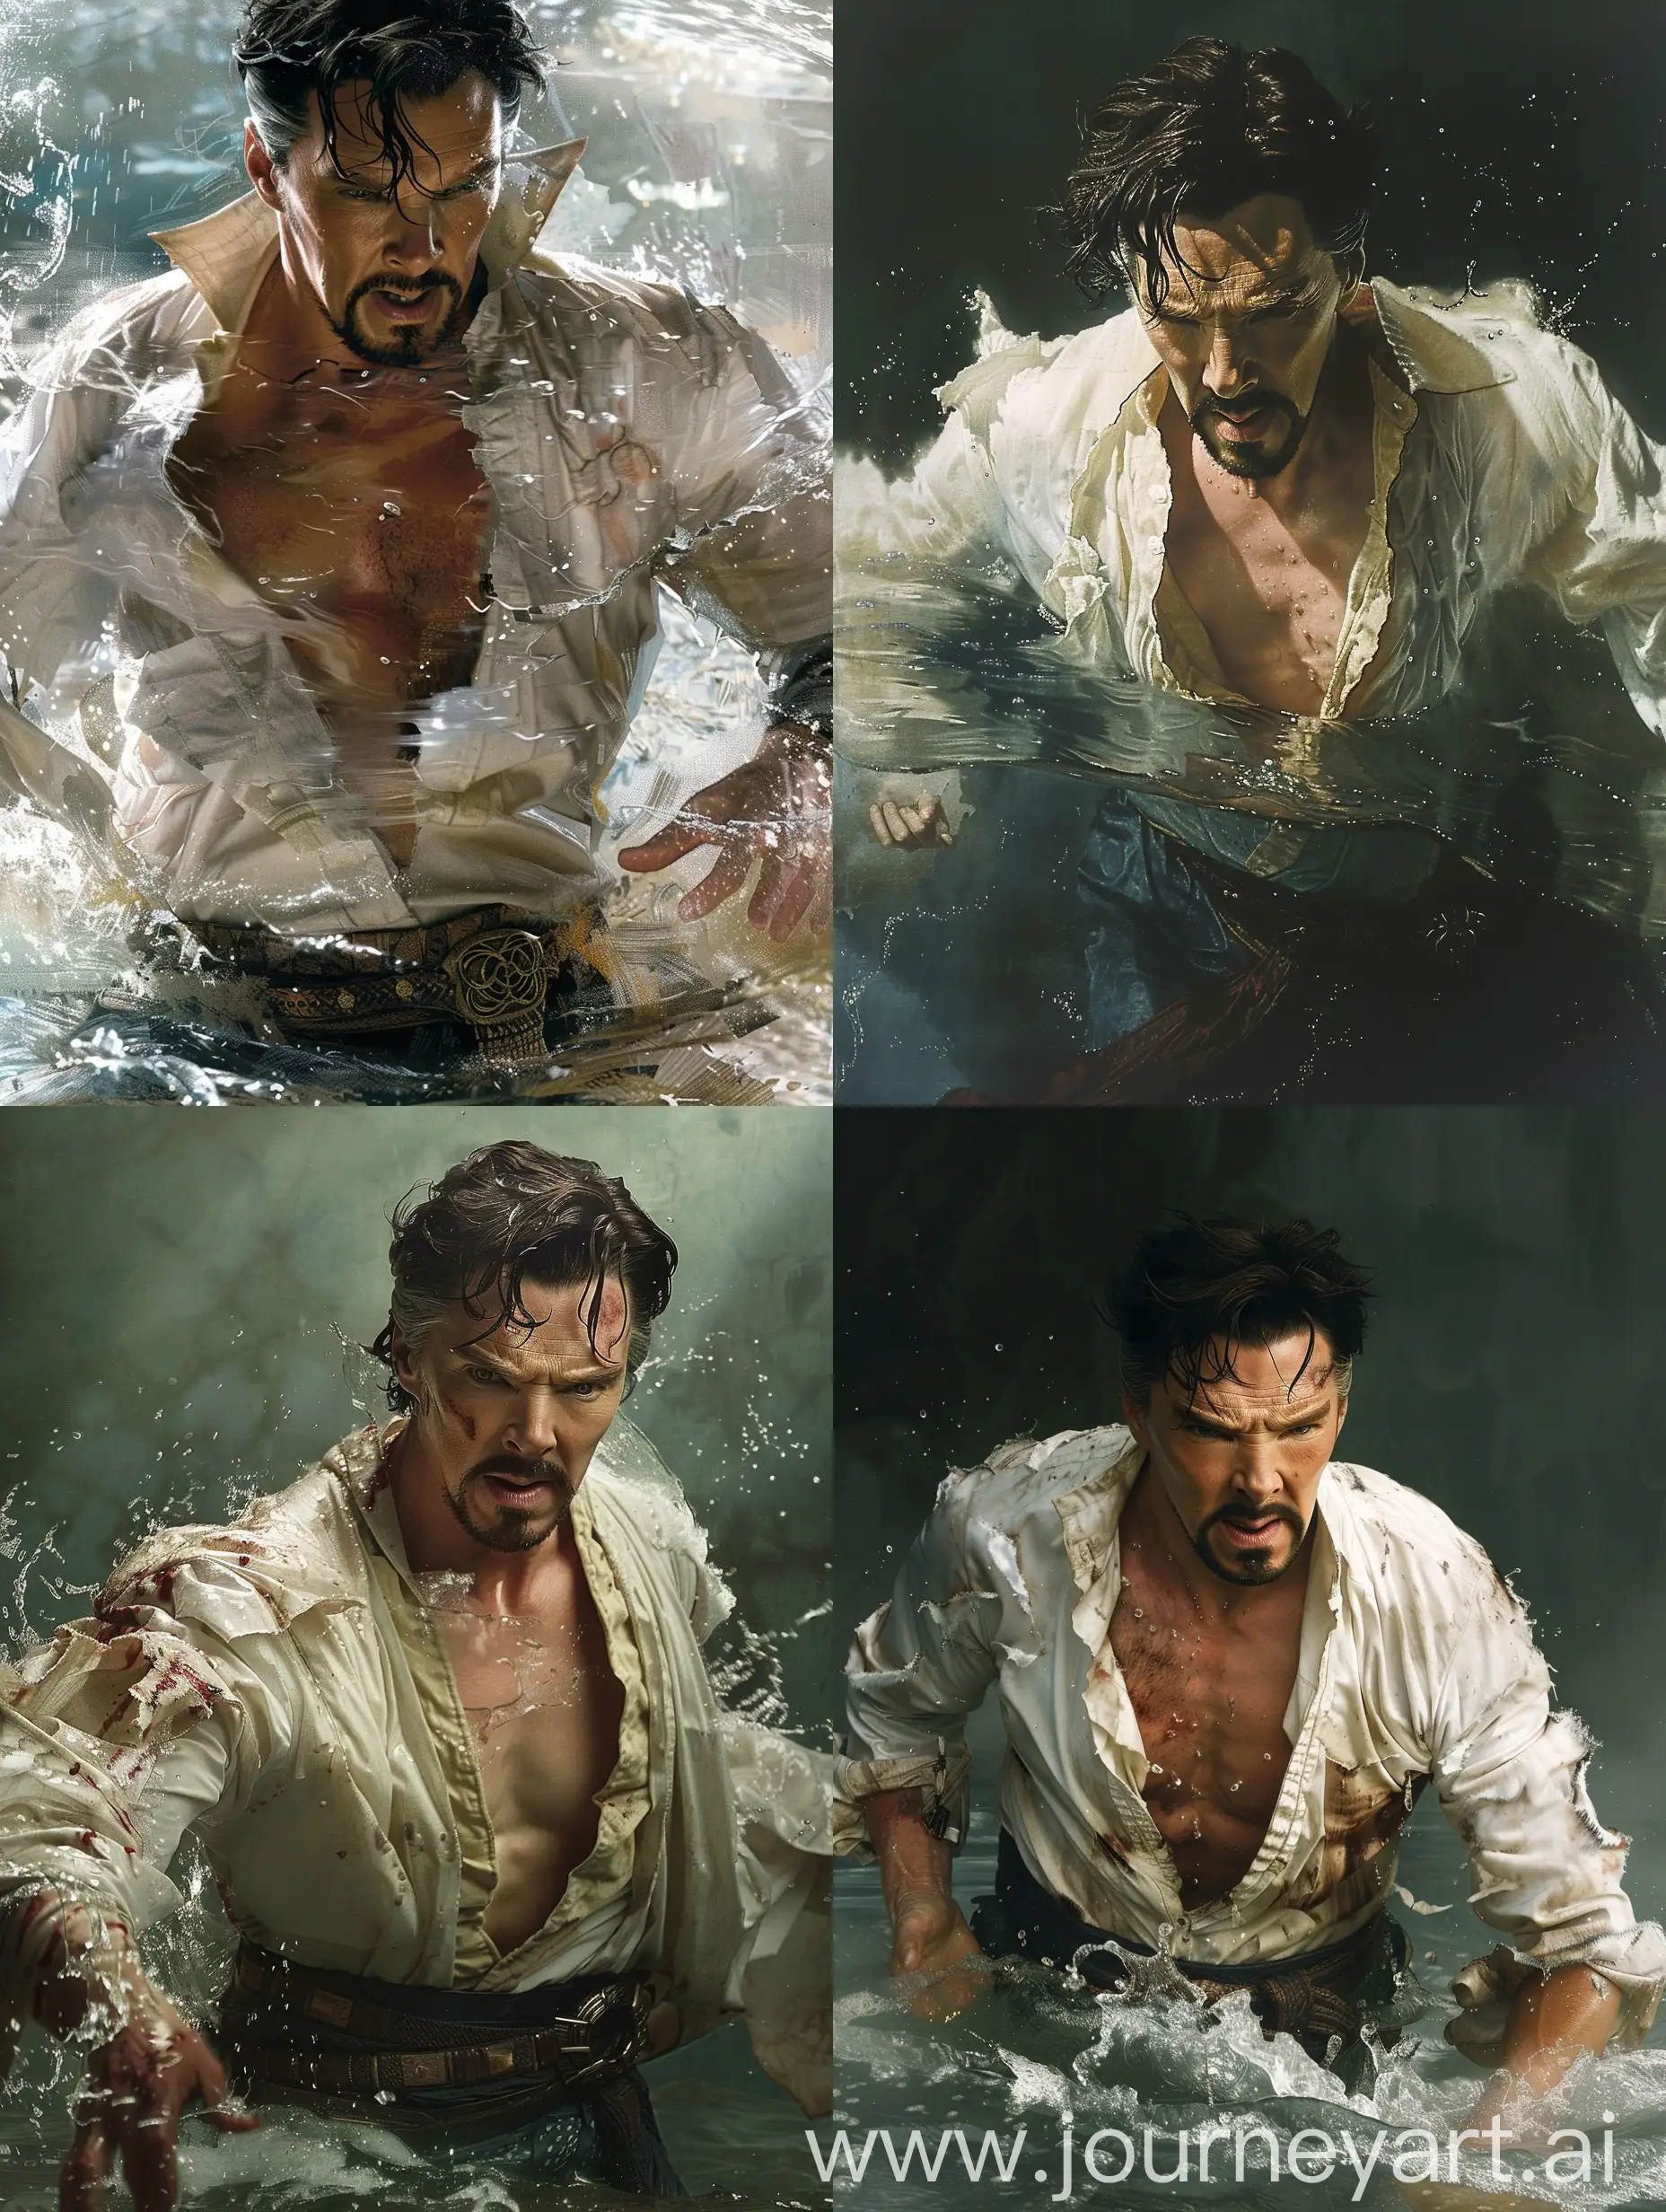 Wet-and-Powerful-Doctor-Strange-Emerges-in-Ripped-Shirt